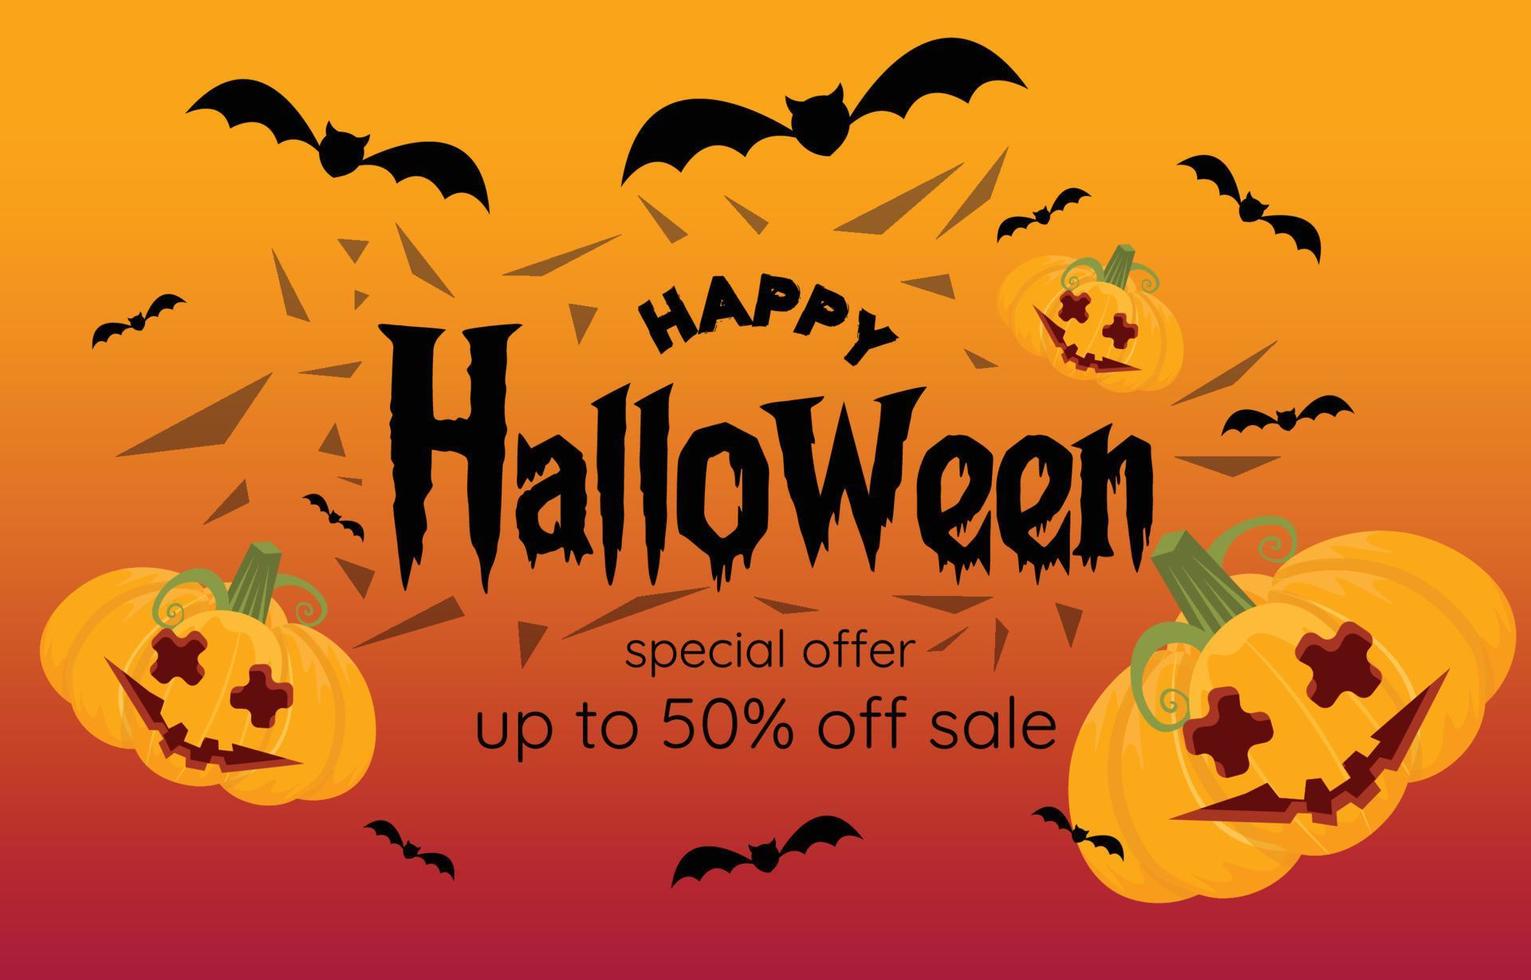 Halloween background. Special offers and shopping discounts. Halloween sale horizontal banner.Vector illustration holiday promotion decorated with cartoon pumpkin ghosts and bats. vector